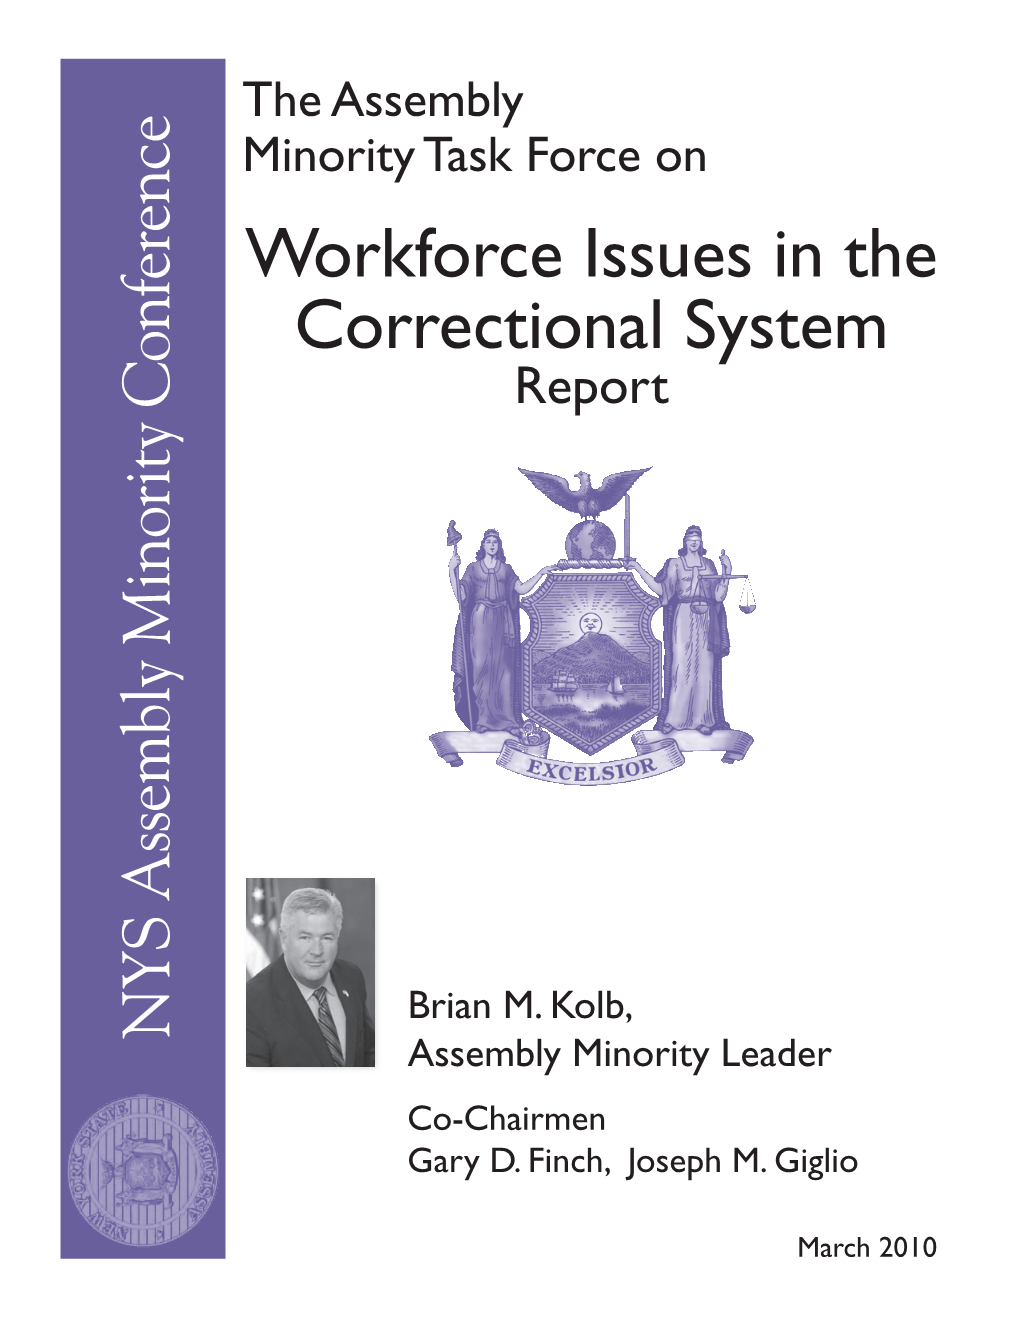 Workforce Issues in the Correctional System Report